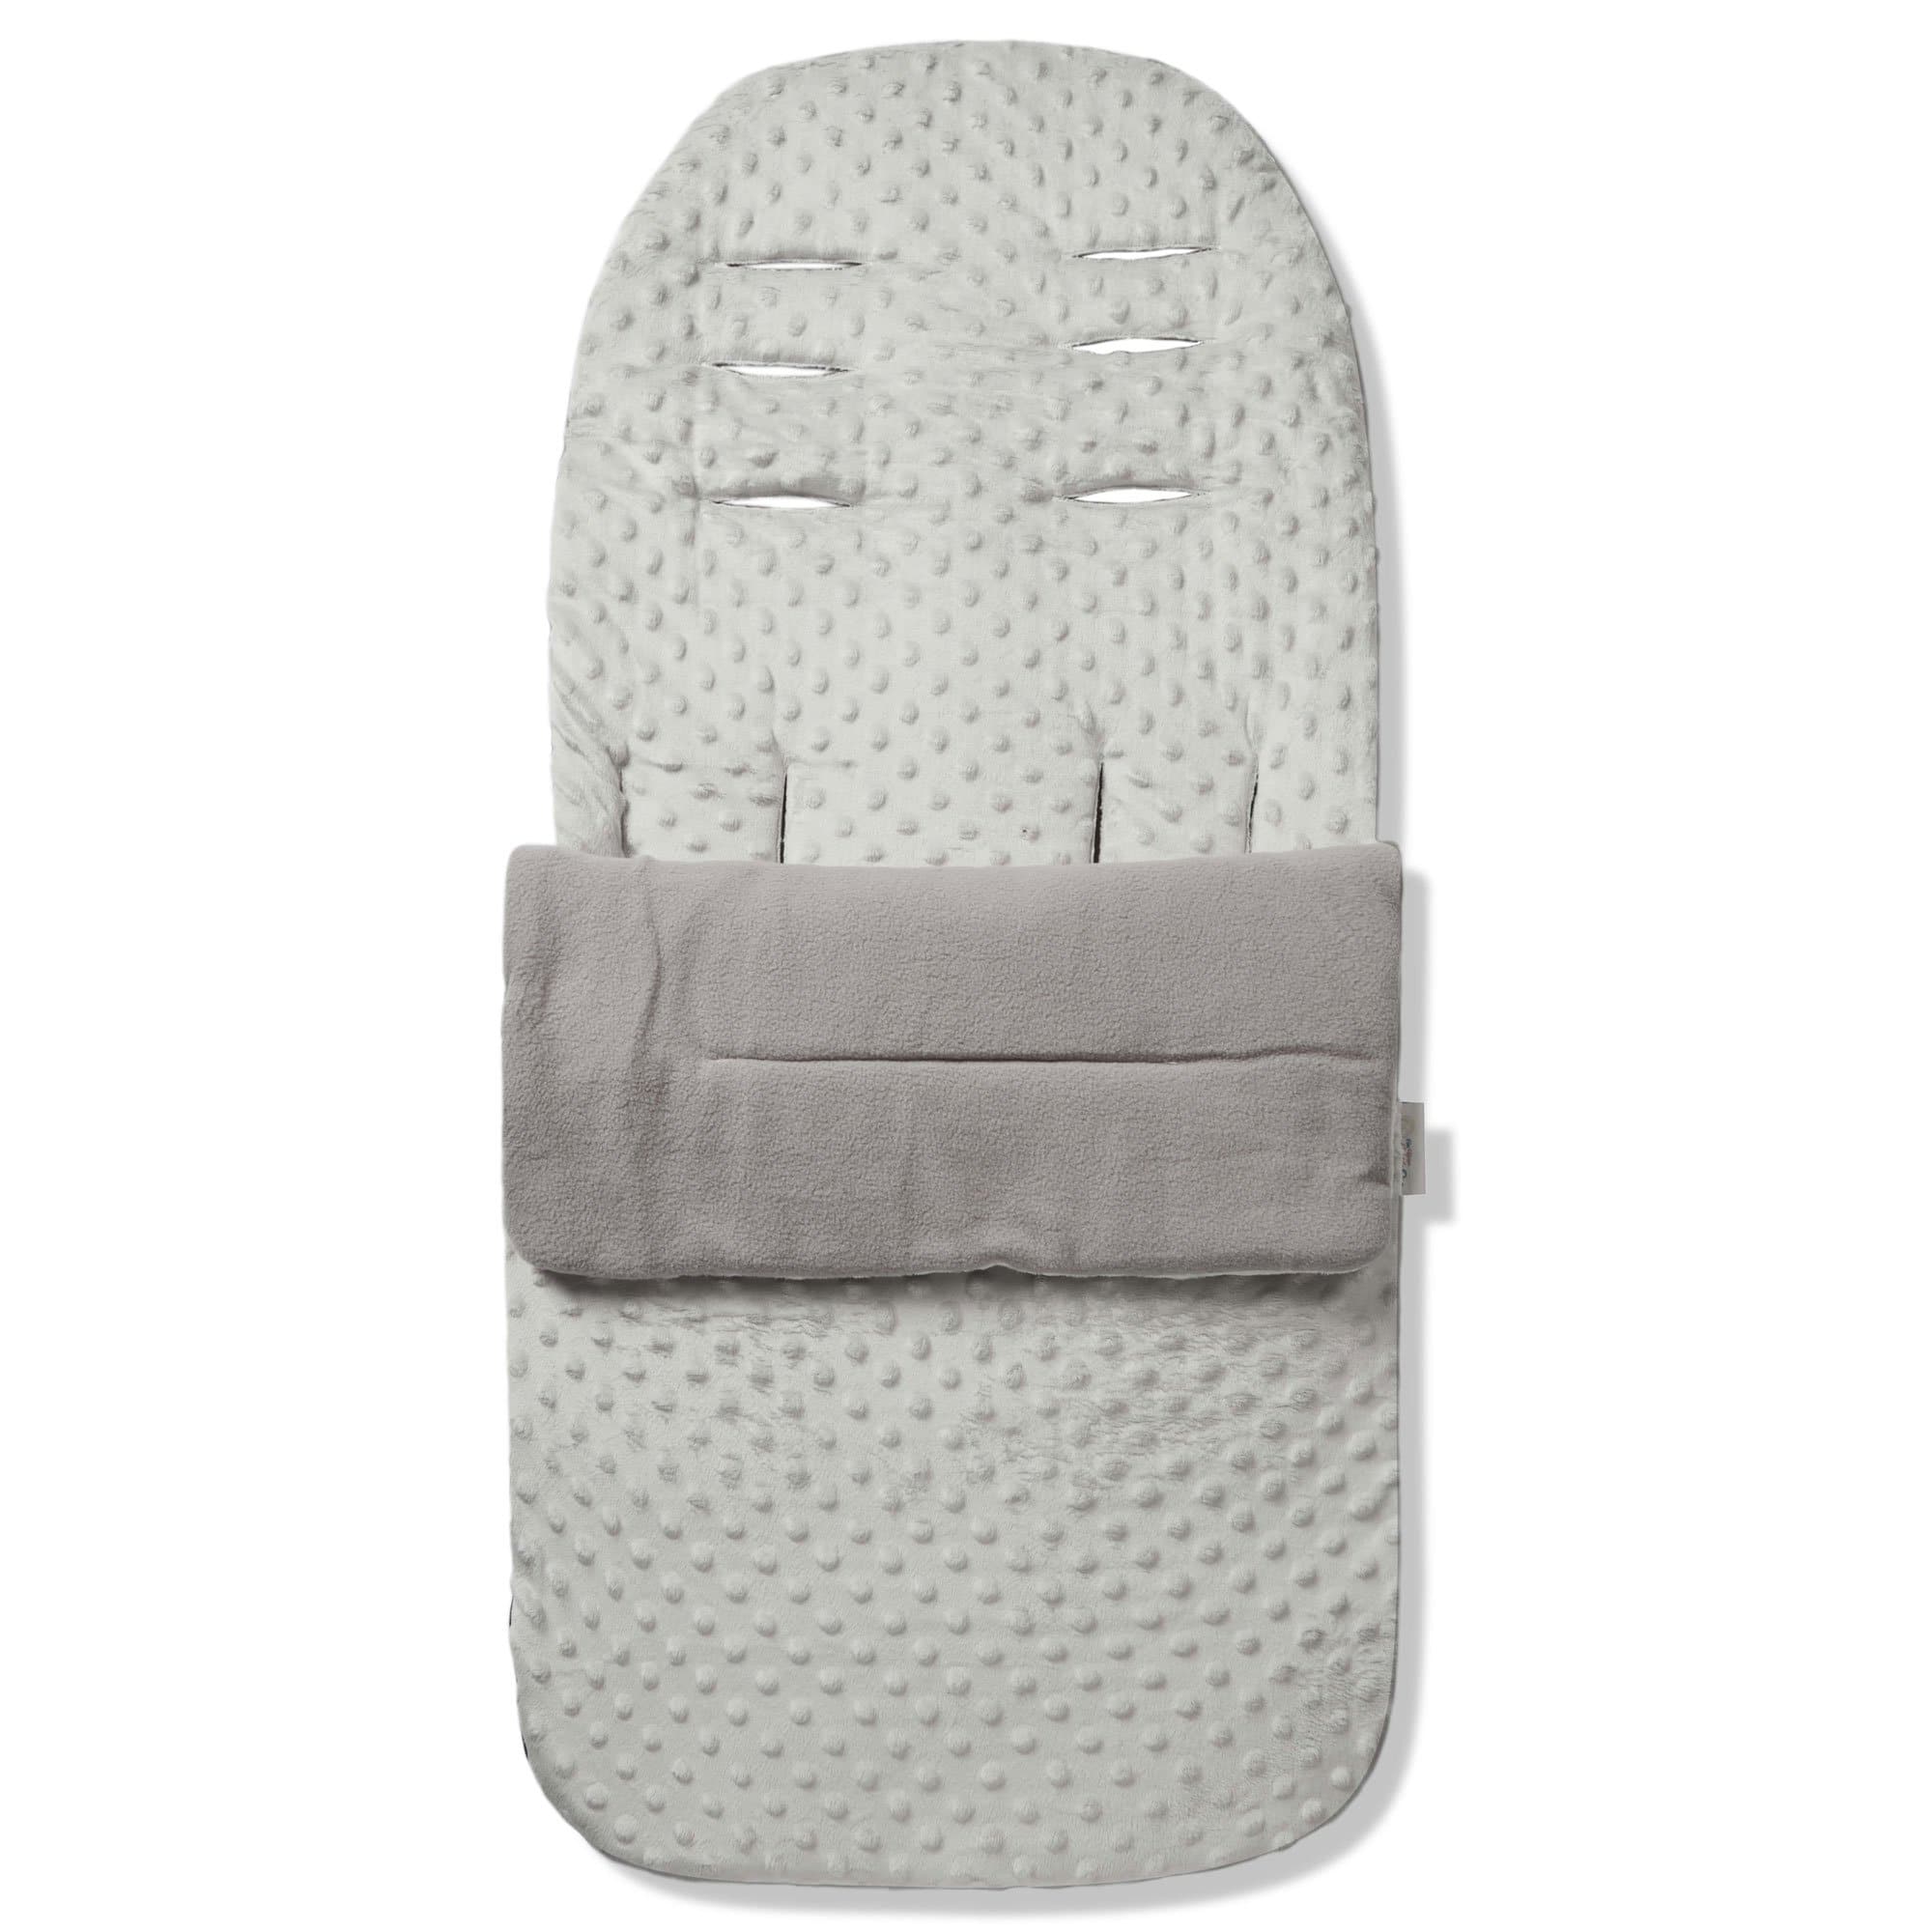 Dimple Footmuff / Cosy Toes Compatible with Jane - Grey / Fits All Models | For Your Little One